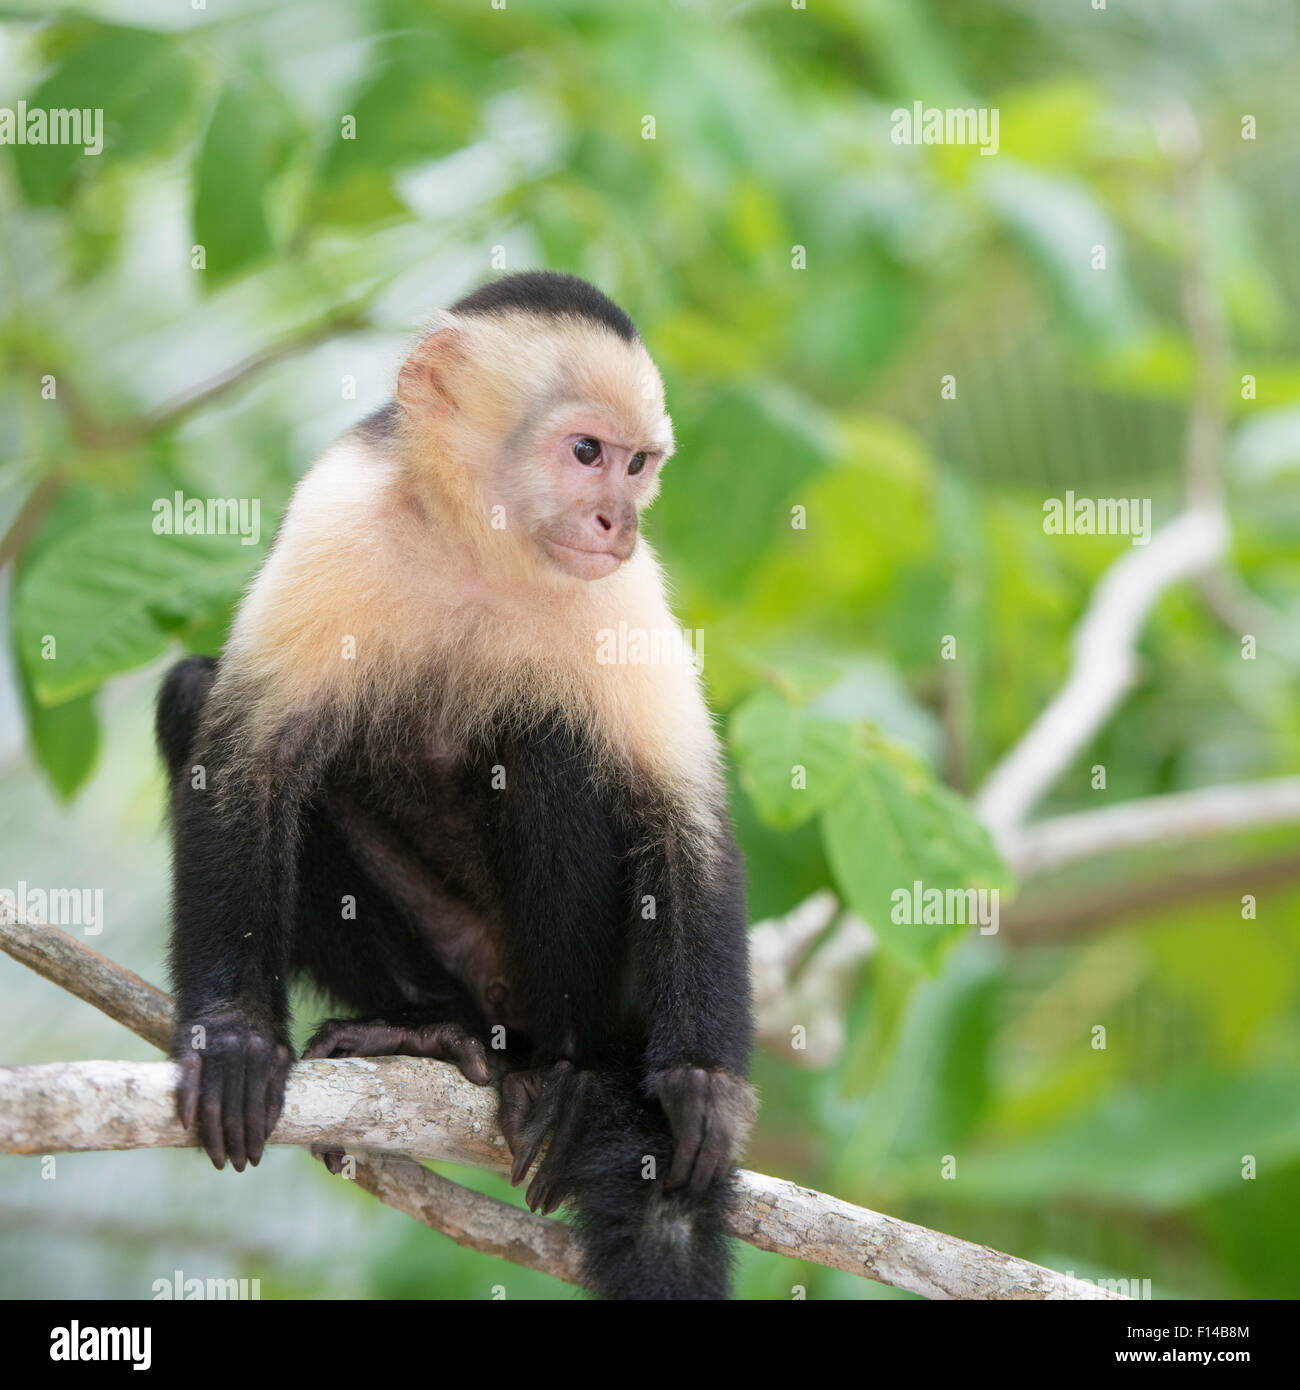 Gracile Capuchin Monkey in a costa Rica tropical forest lying on a tree branch. Stock Photo